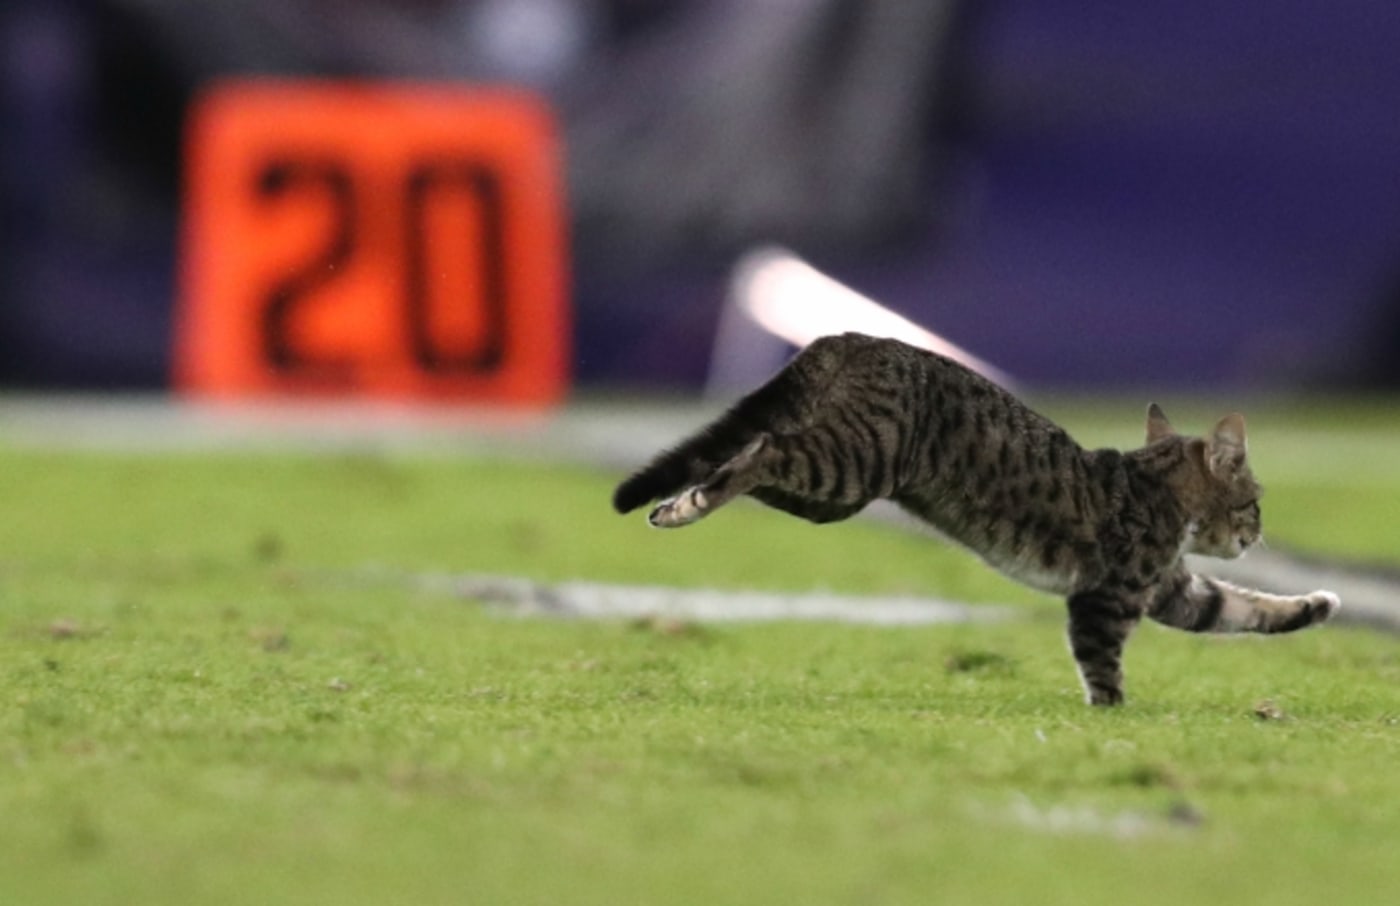 Cat on the field during Dolphins/Ravens game.